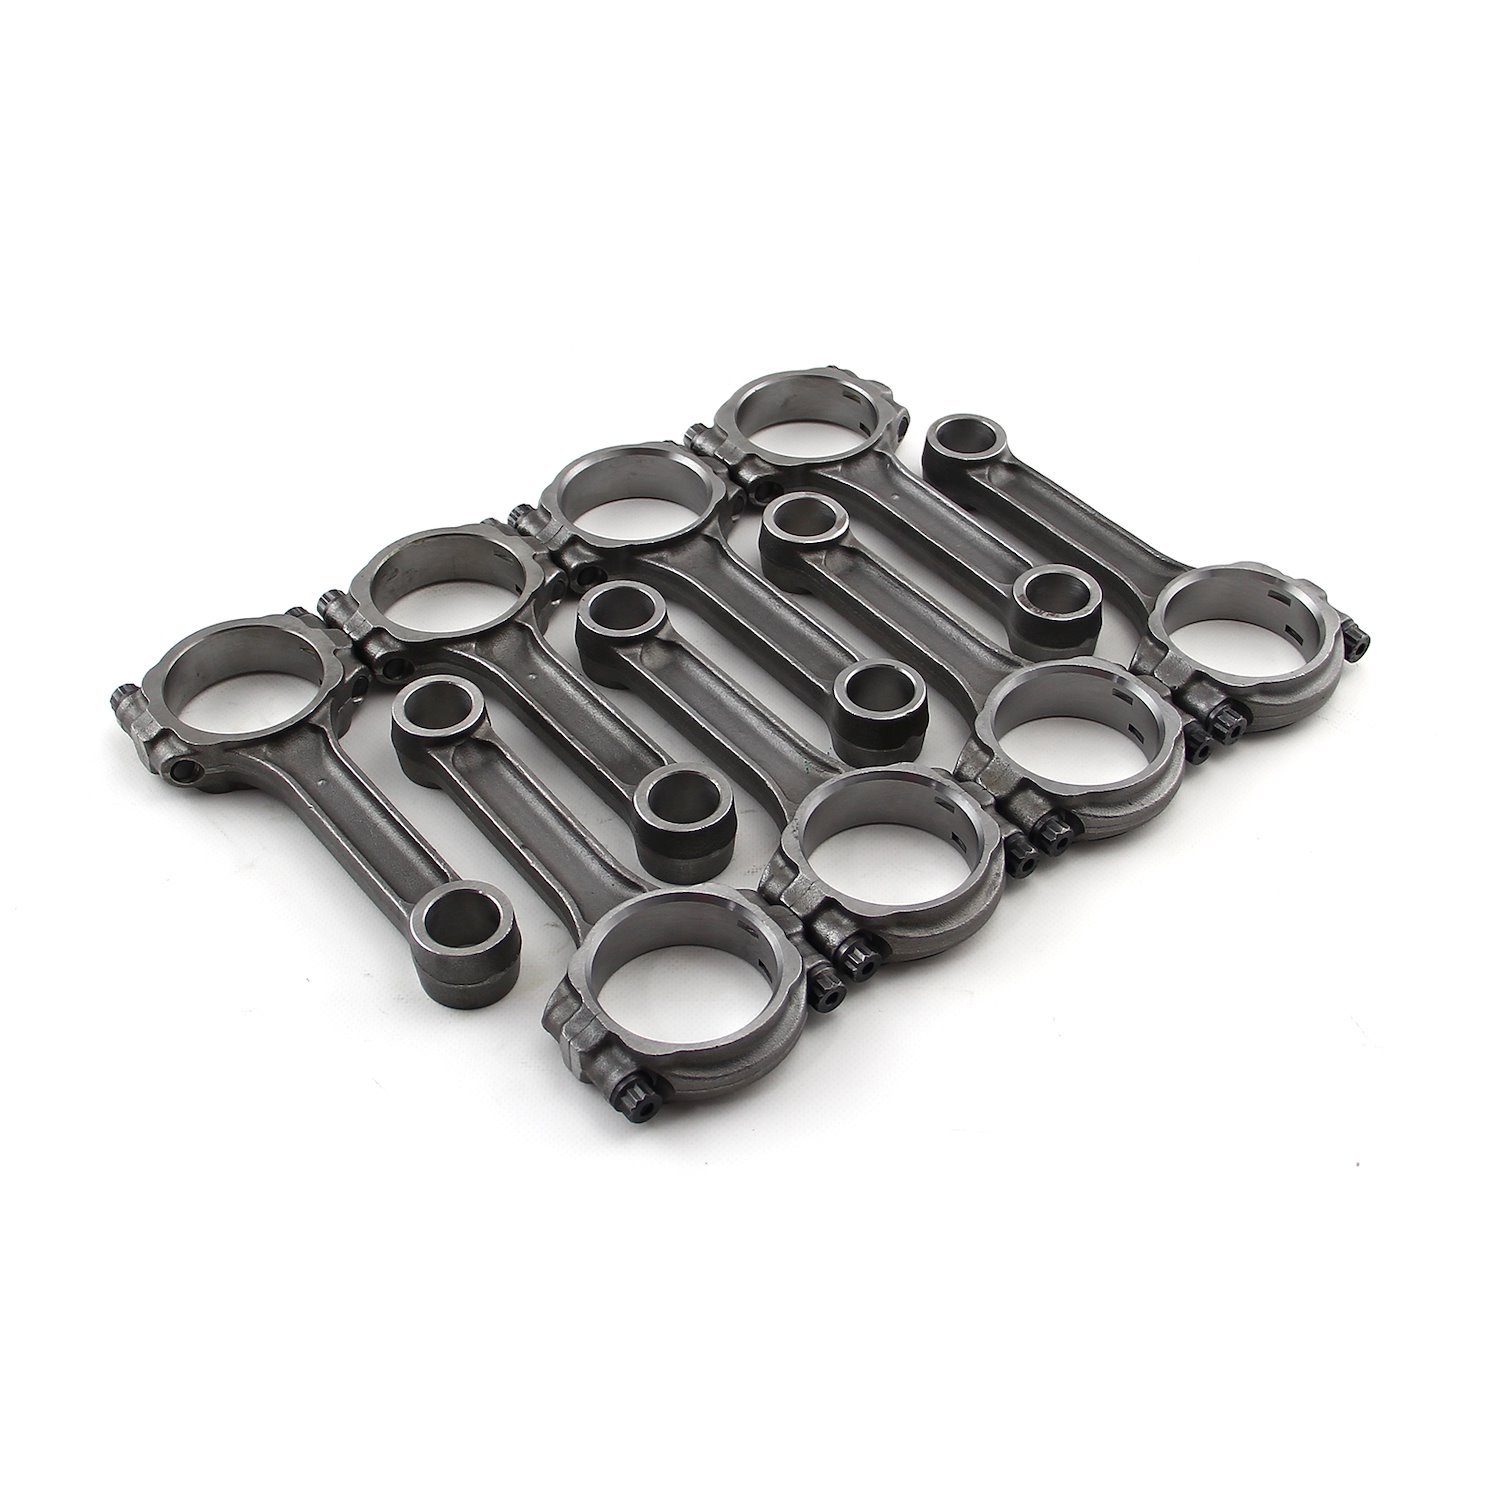 I Beam 6.135 2.200 .990 Press Fit 5140 Connecting Rods Suits Chevy BBC 454